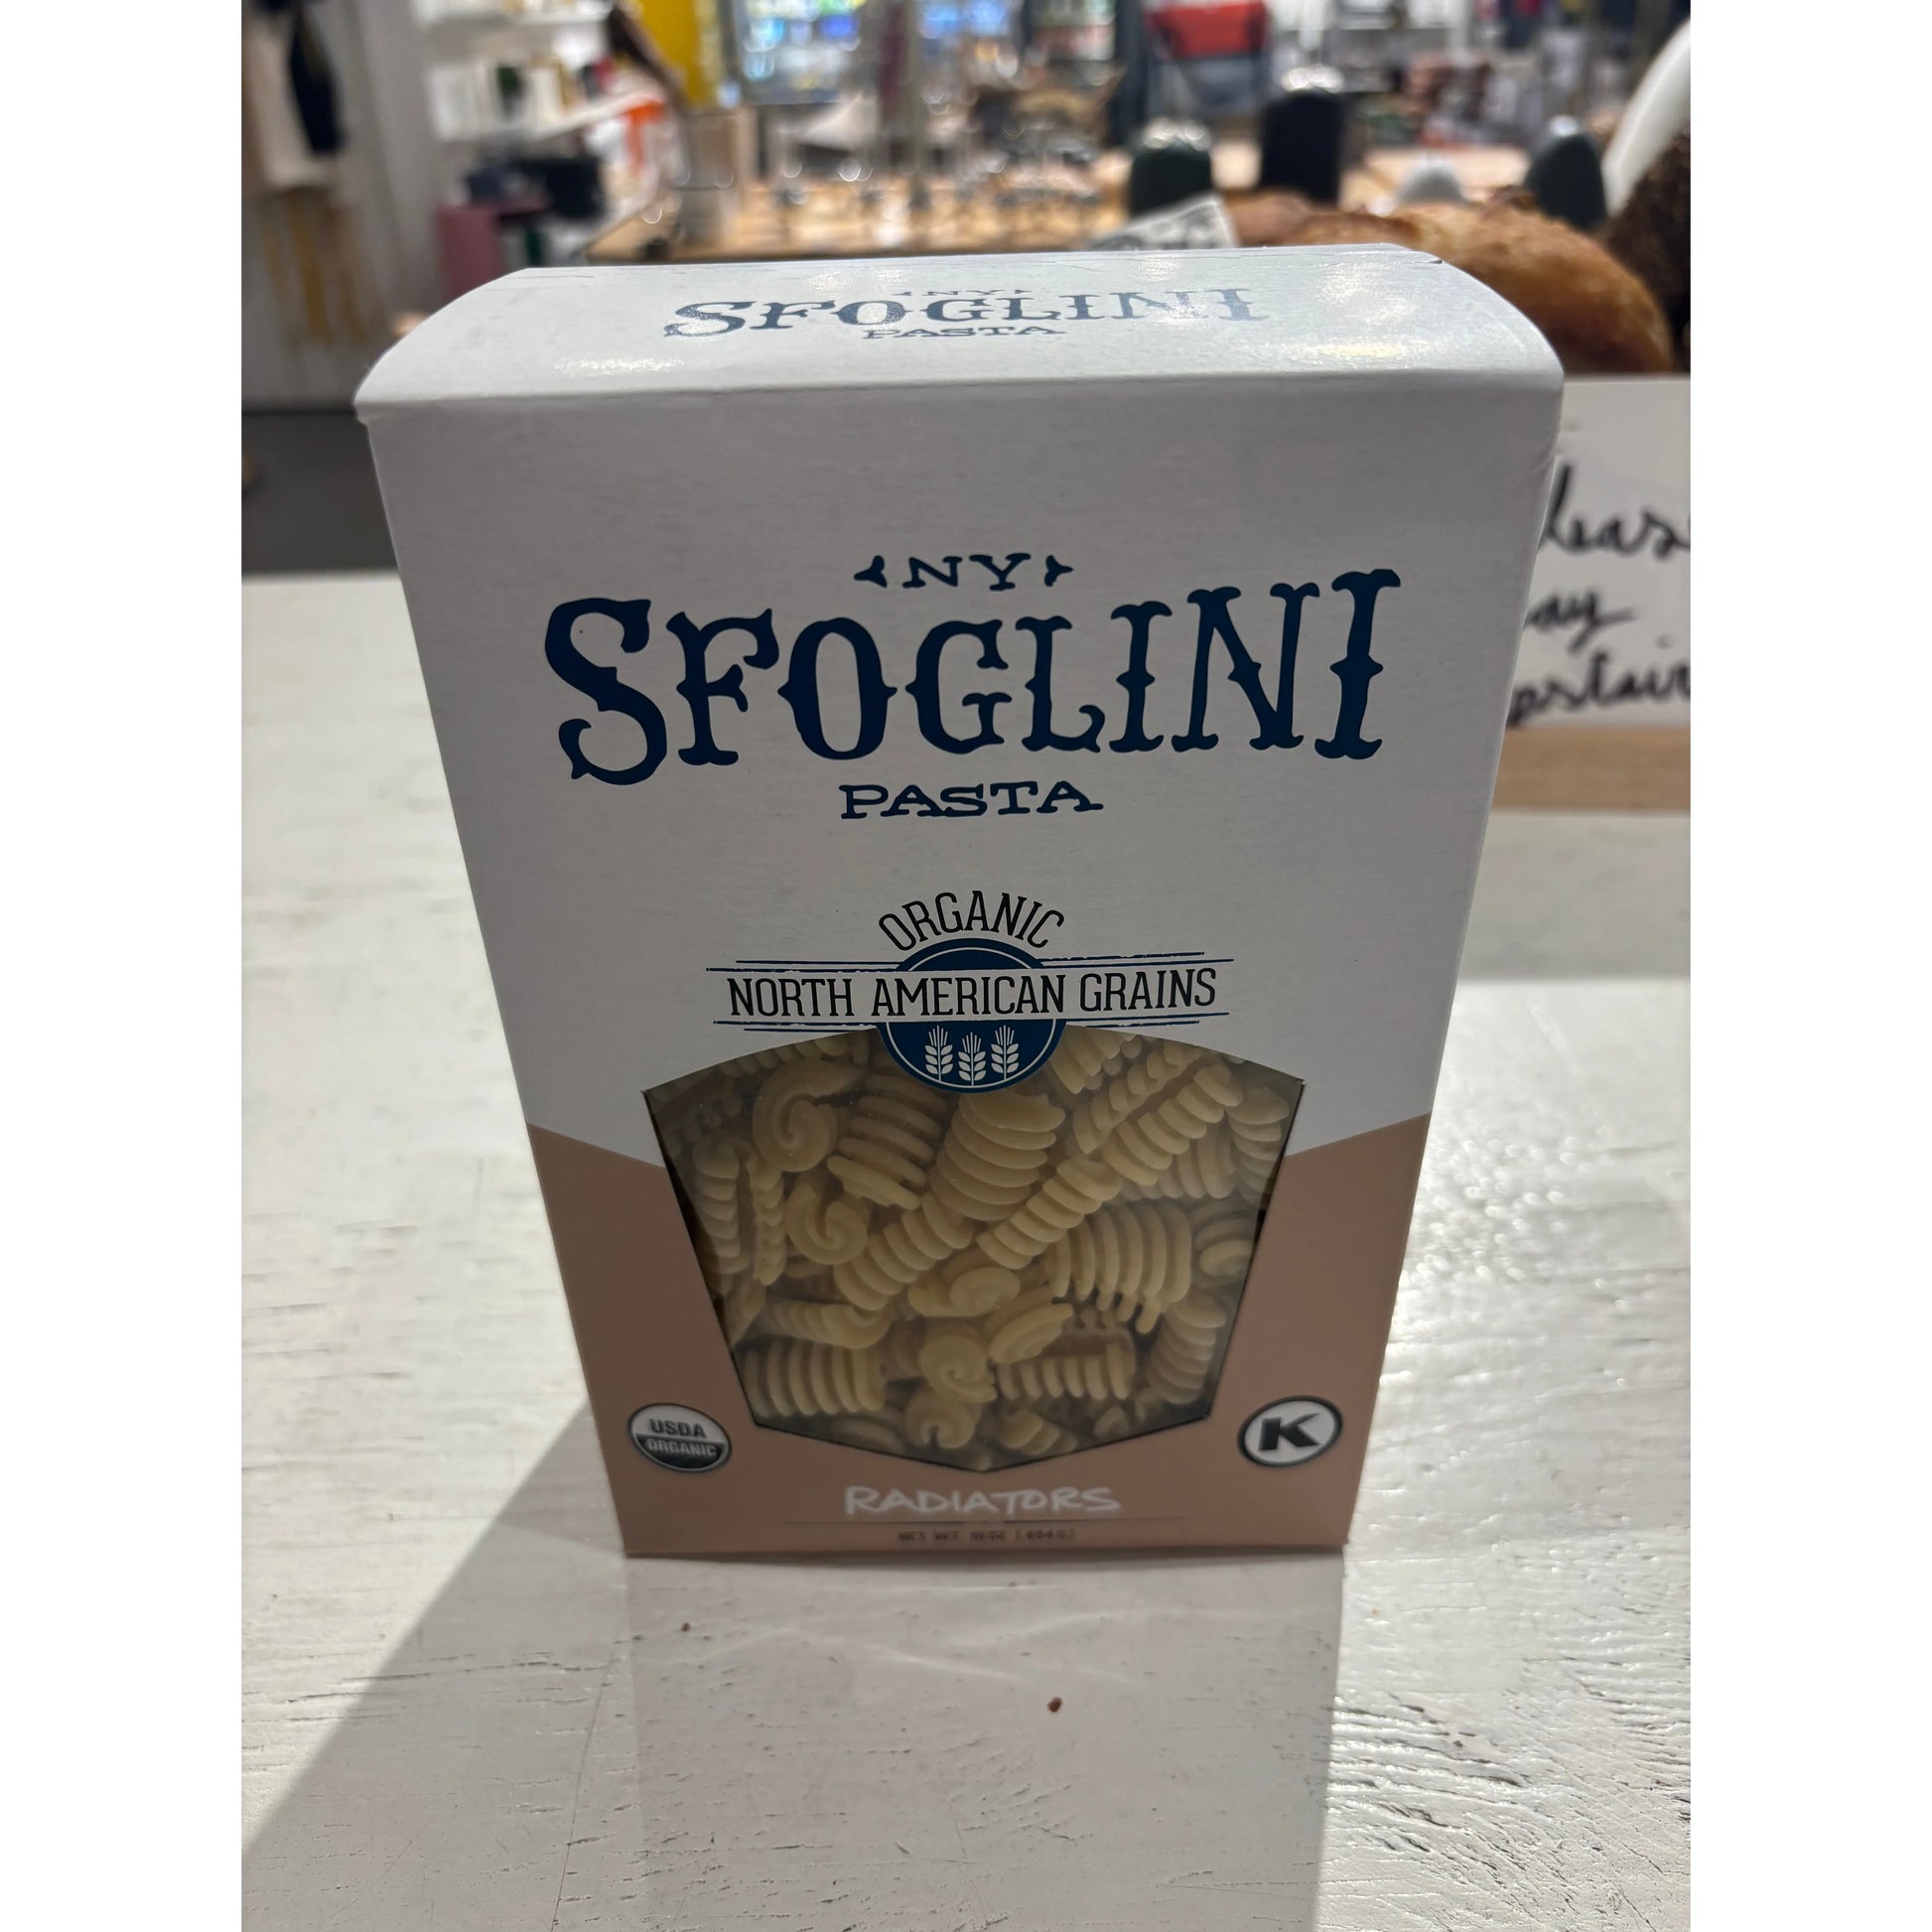 A box of Westerlind organic radiatori pasta made from north american grains, placed on a store shelf.